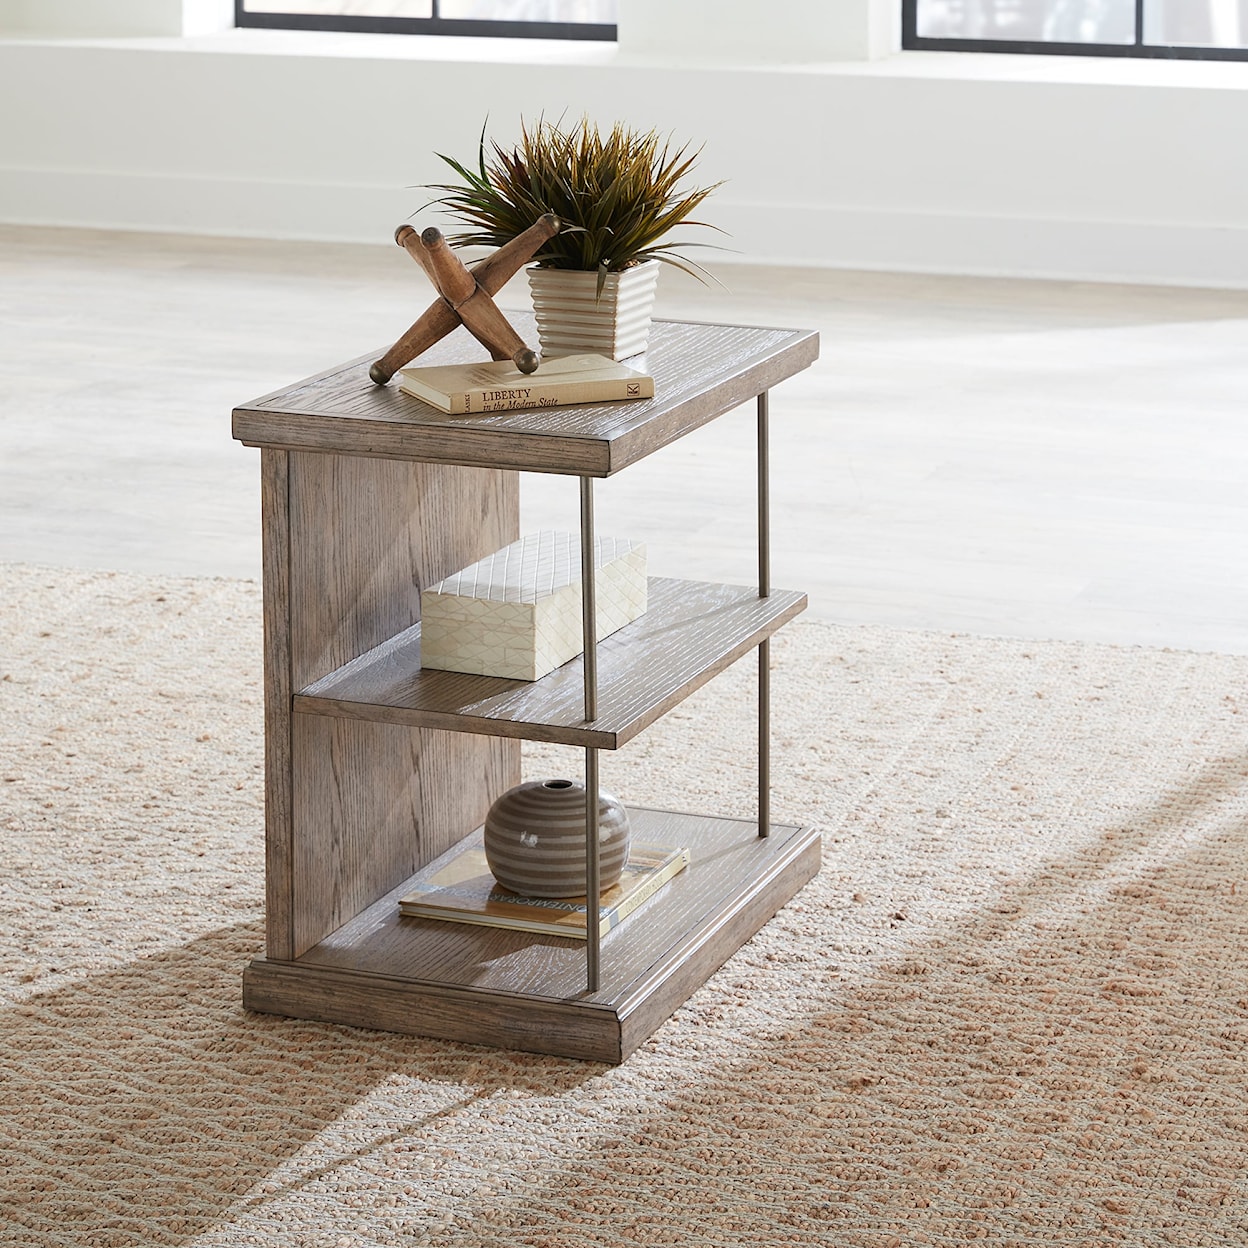 Libby Cohen Chair Side Table